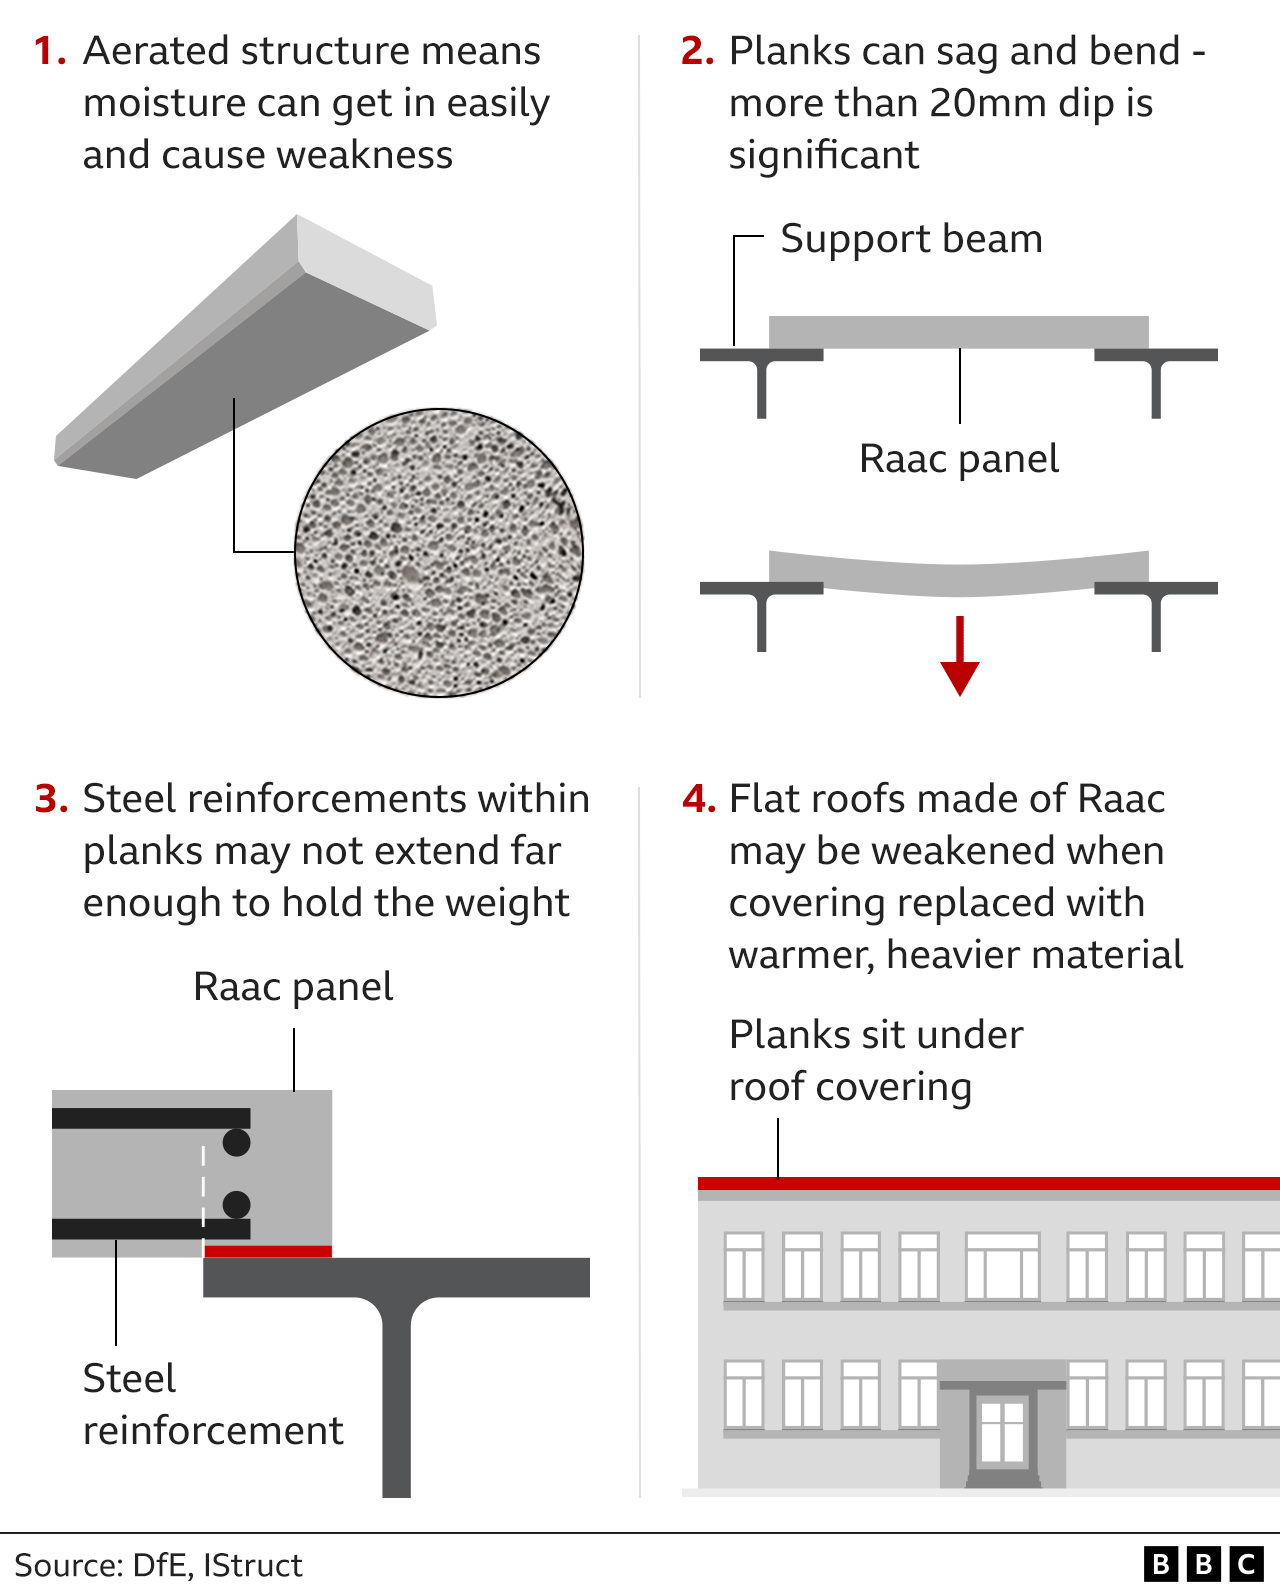 Graphic explaining what the problem is with Raac: its aerated structure means moisture can get in easily and cause weakness; the planks can then sag and bend; steel reinforcements within the planks may not extend far enough to hold the weight; while flat roofs made of Raac may be weakened when covering is replaced with heavier material